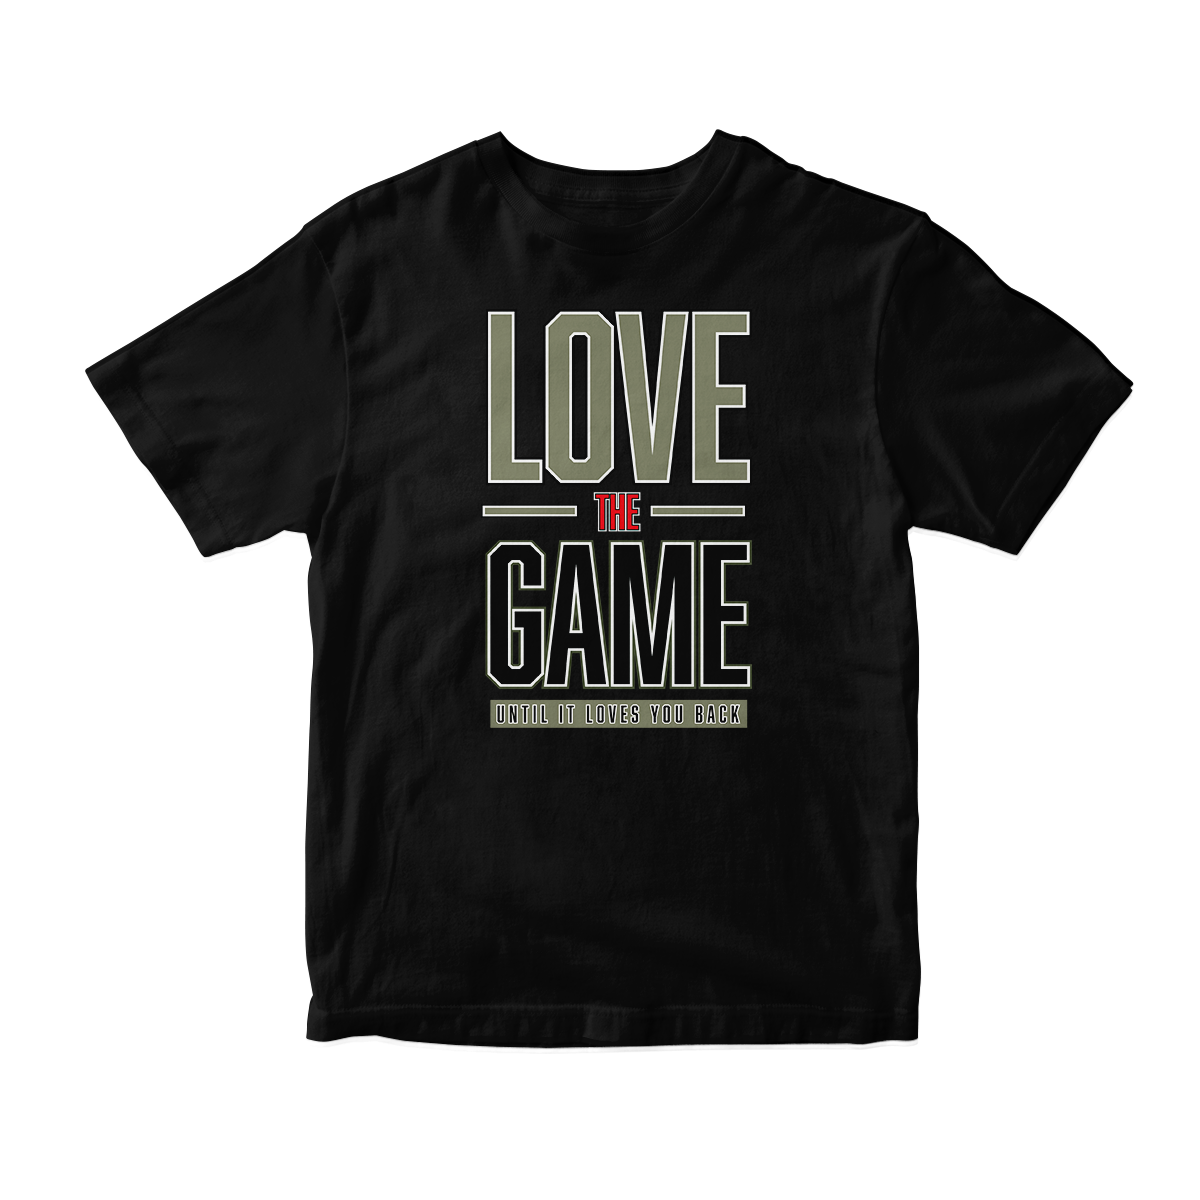 'Love The Game' in Medium Olive CW Short Sleeve Tee